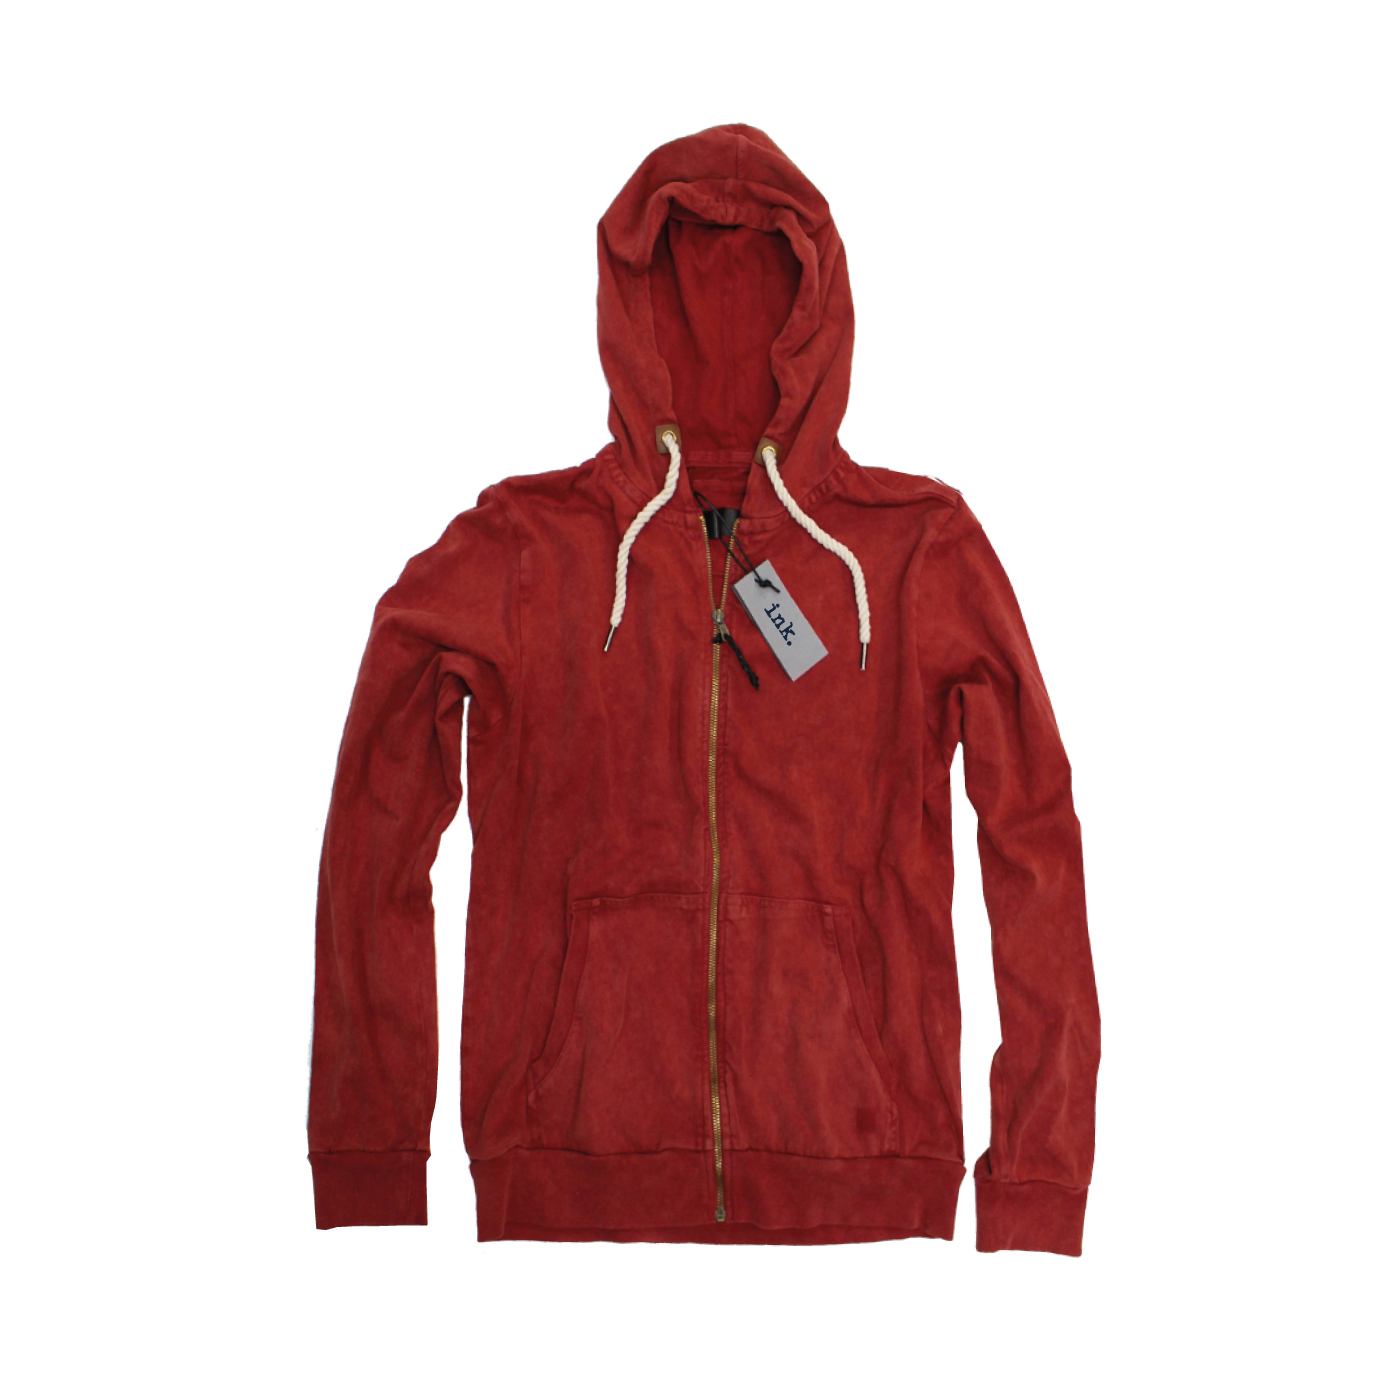 Bacon-flaming-red-hoodie-1-1